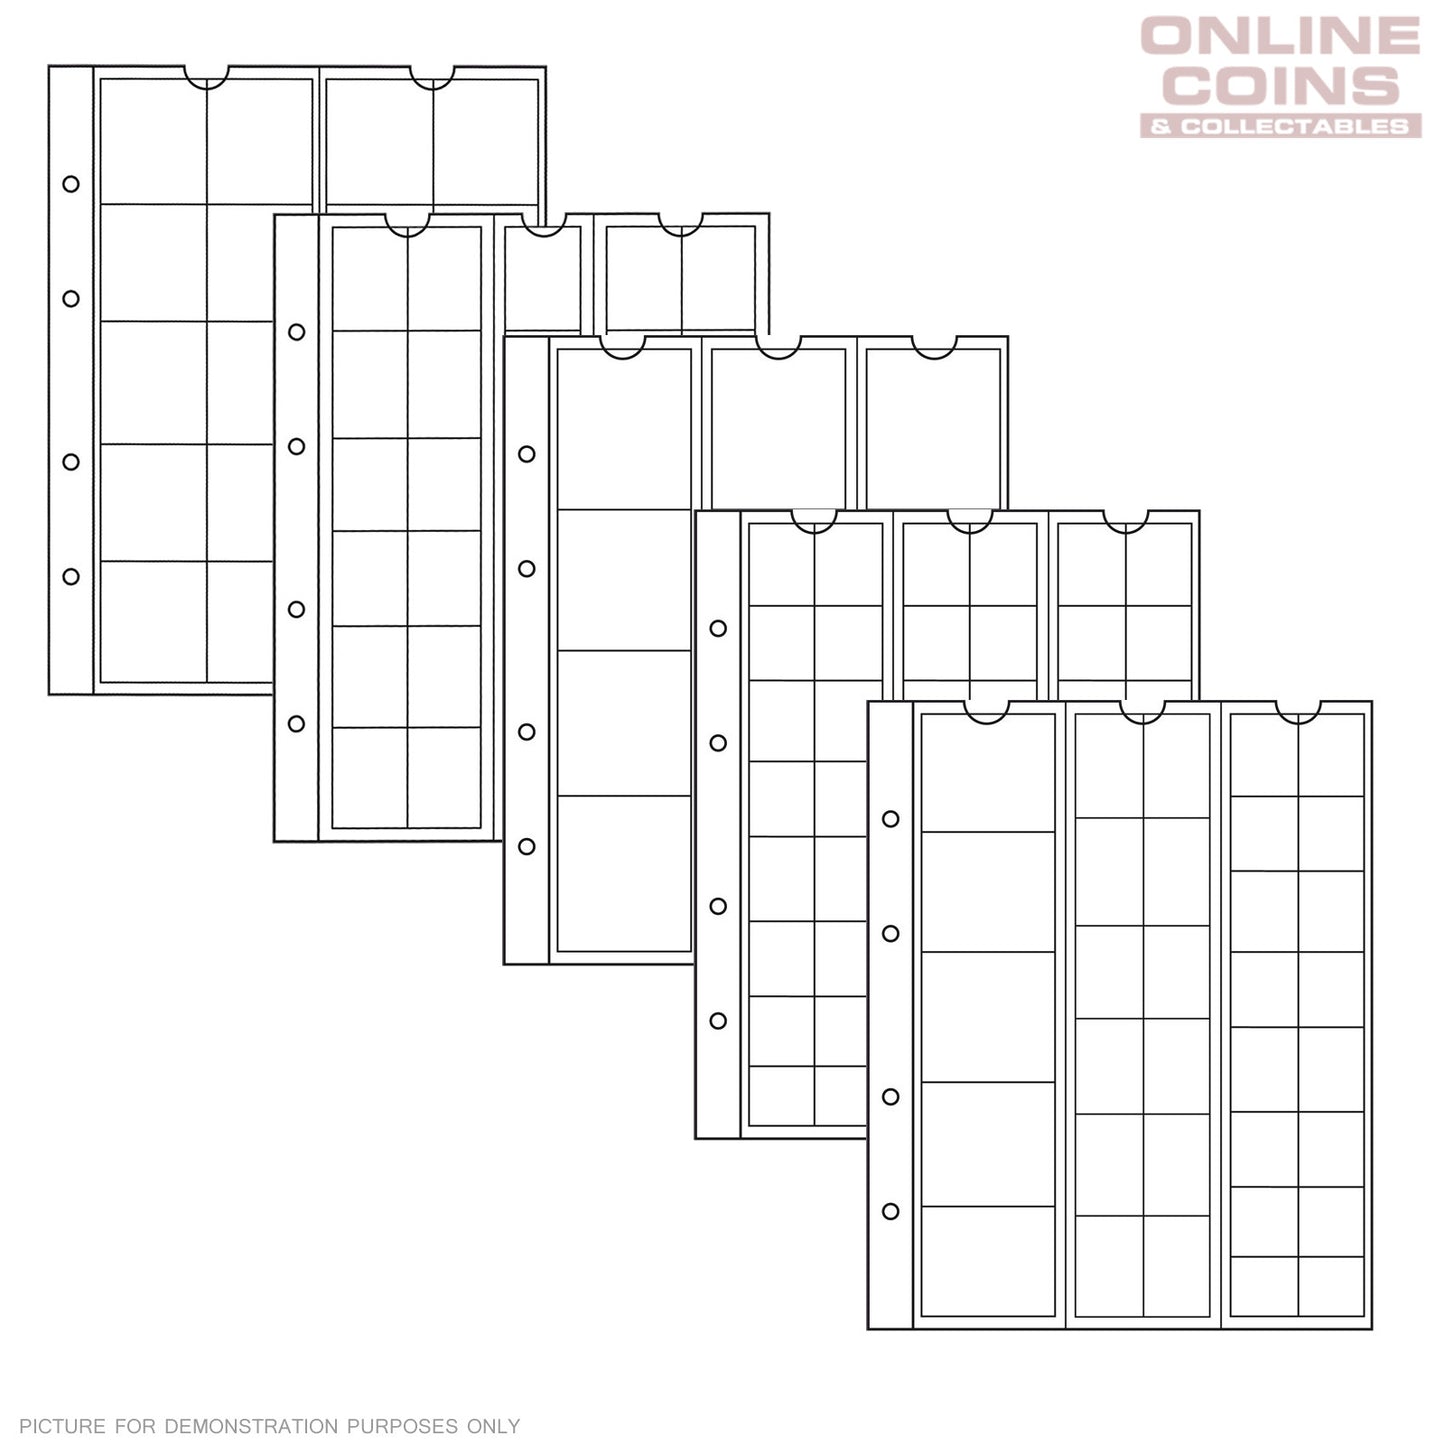 Lighthouse - Numis Assorted Clear Coin Album Pages - Packet of 5